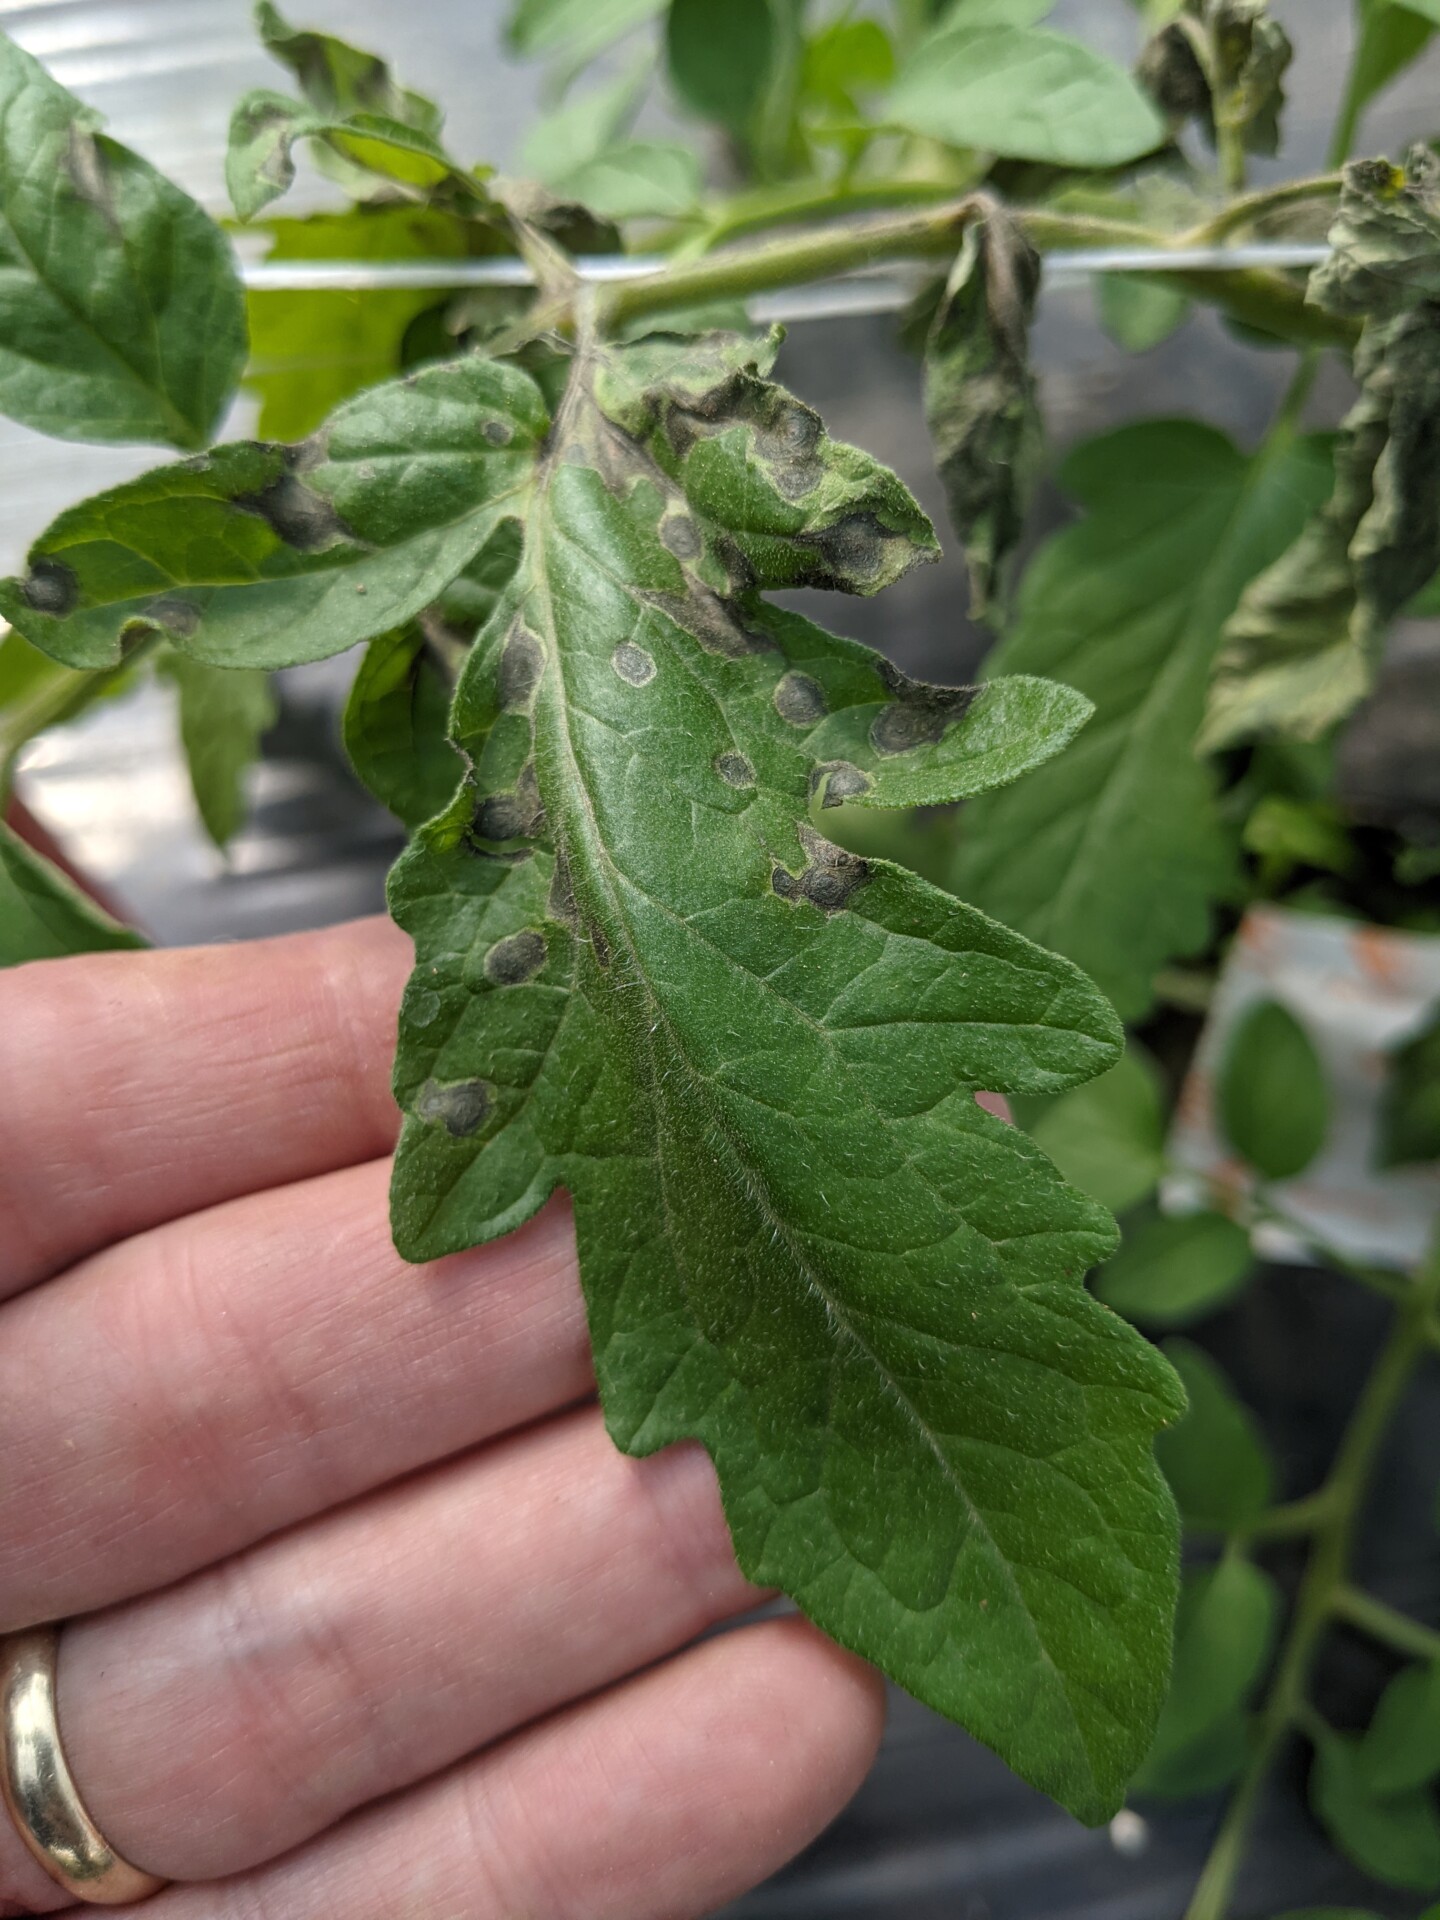 Figure 2. Tomato spotted wilt virus includes a necrotic ring spot lesion.